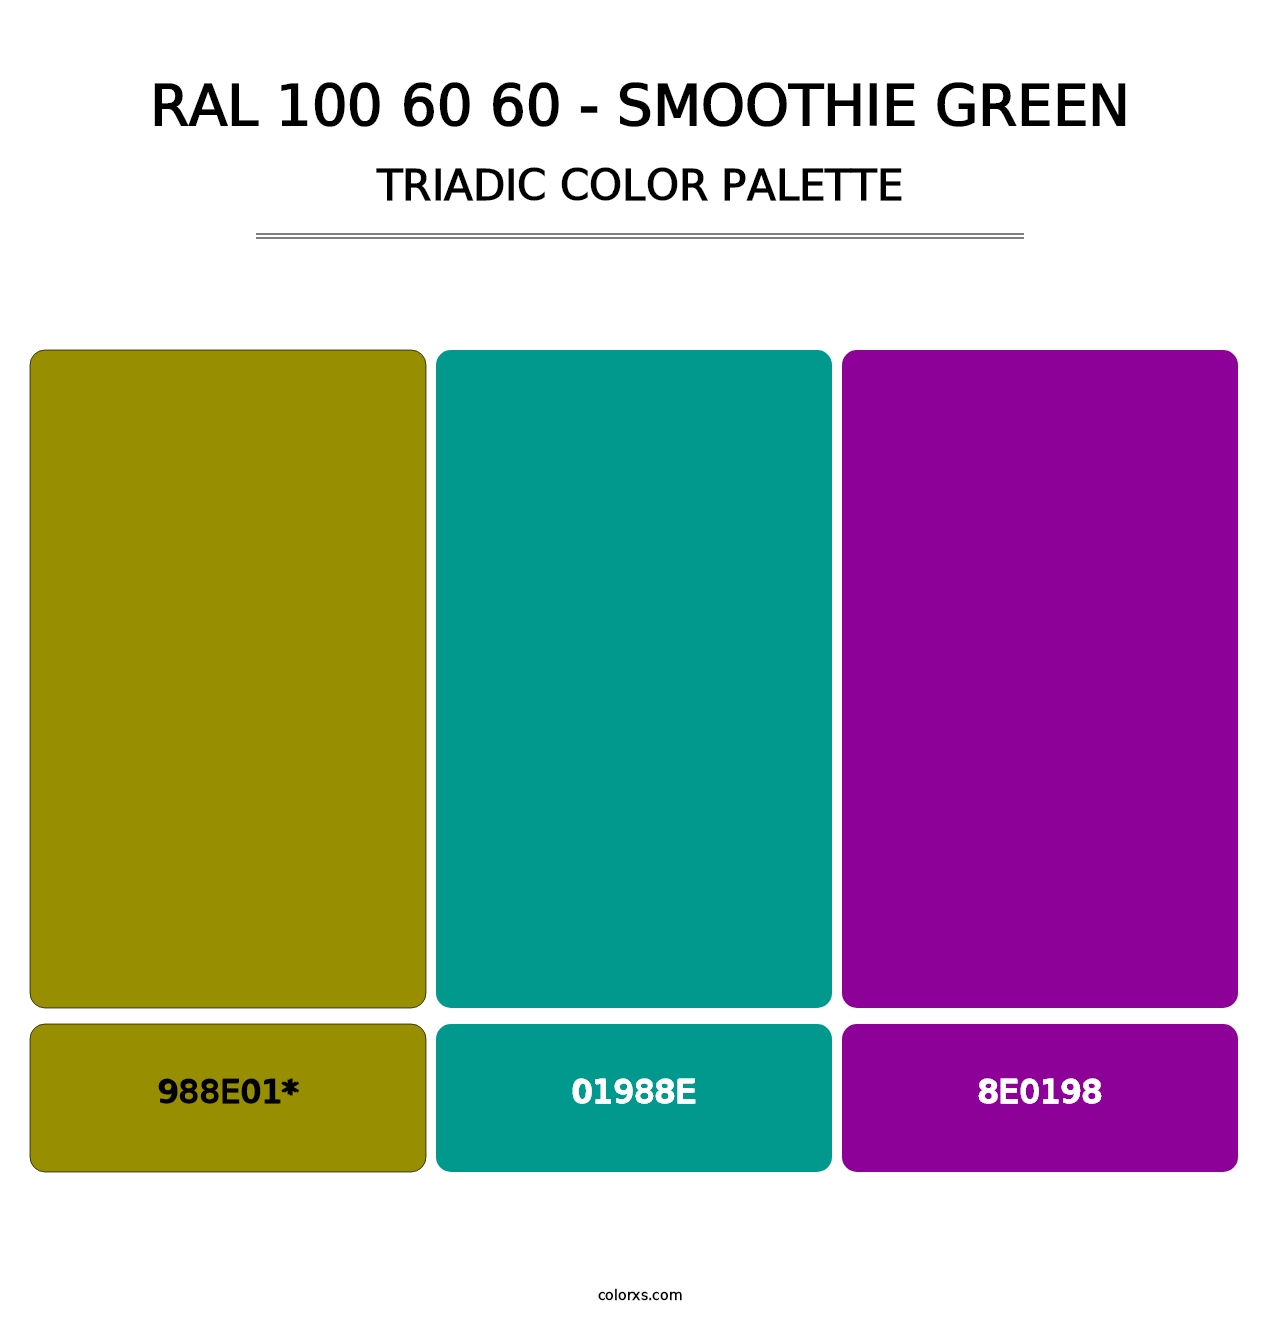 RAL 100 60 60 - Smoothie Green - Triadic Color Palette